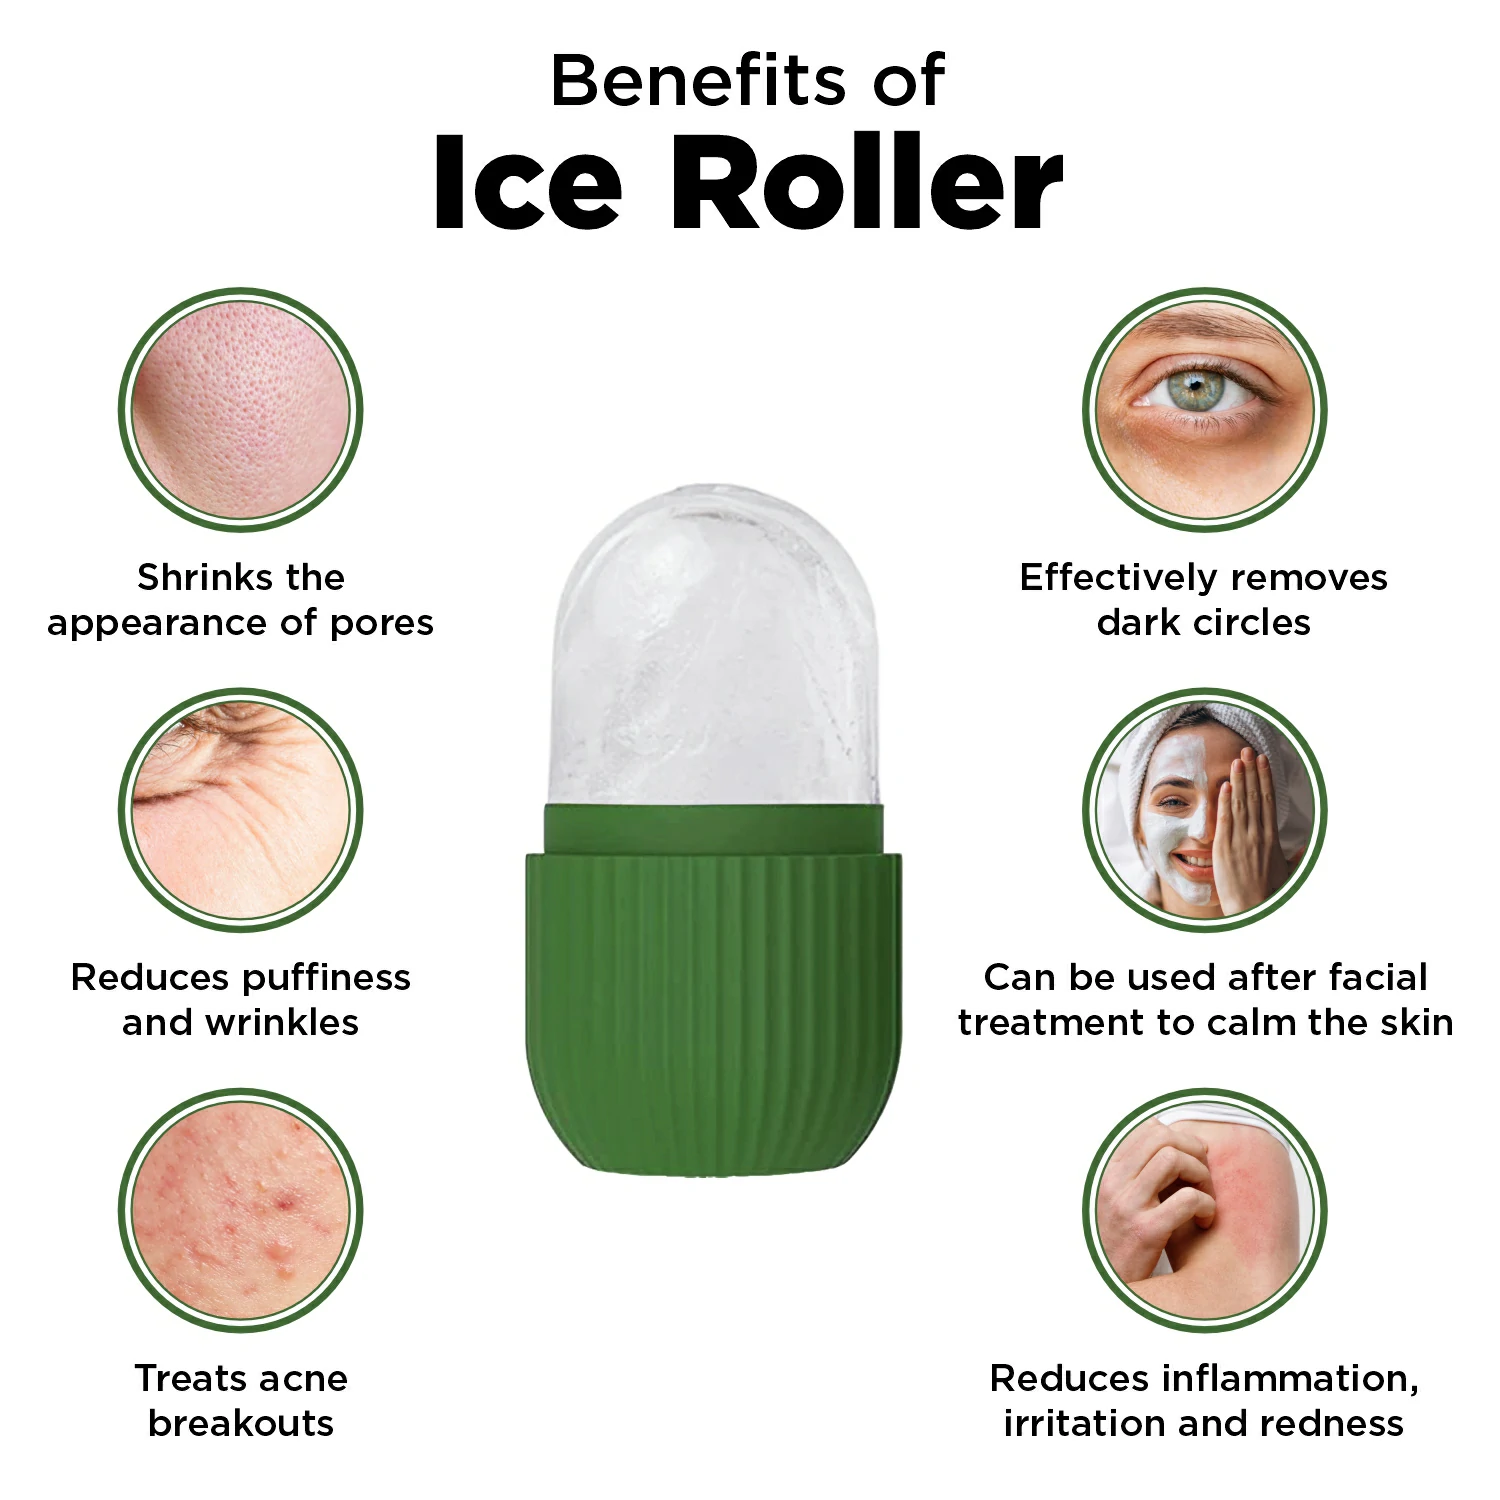 Benefits of Green Ice Roller